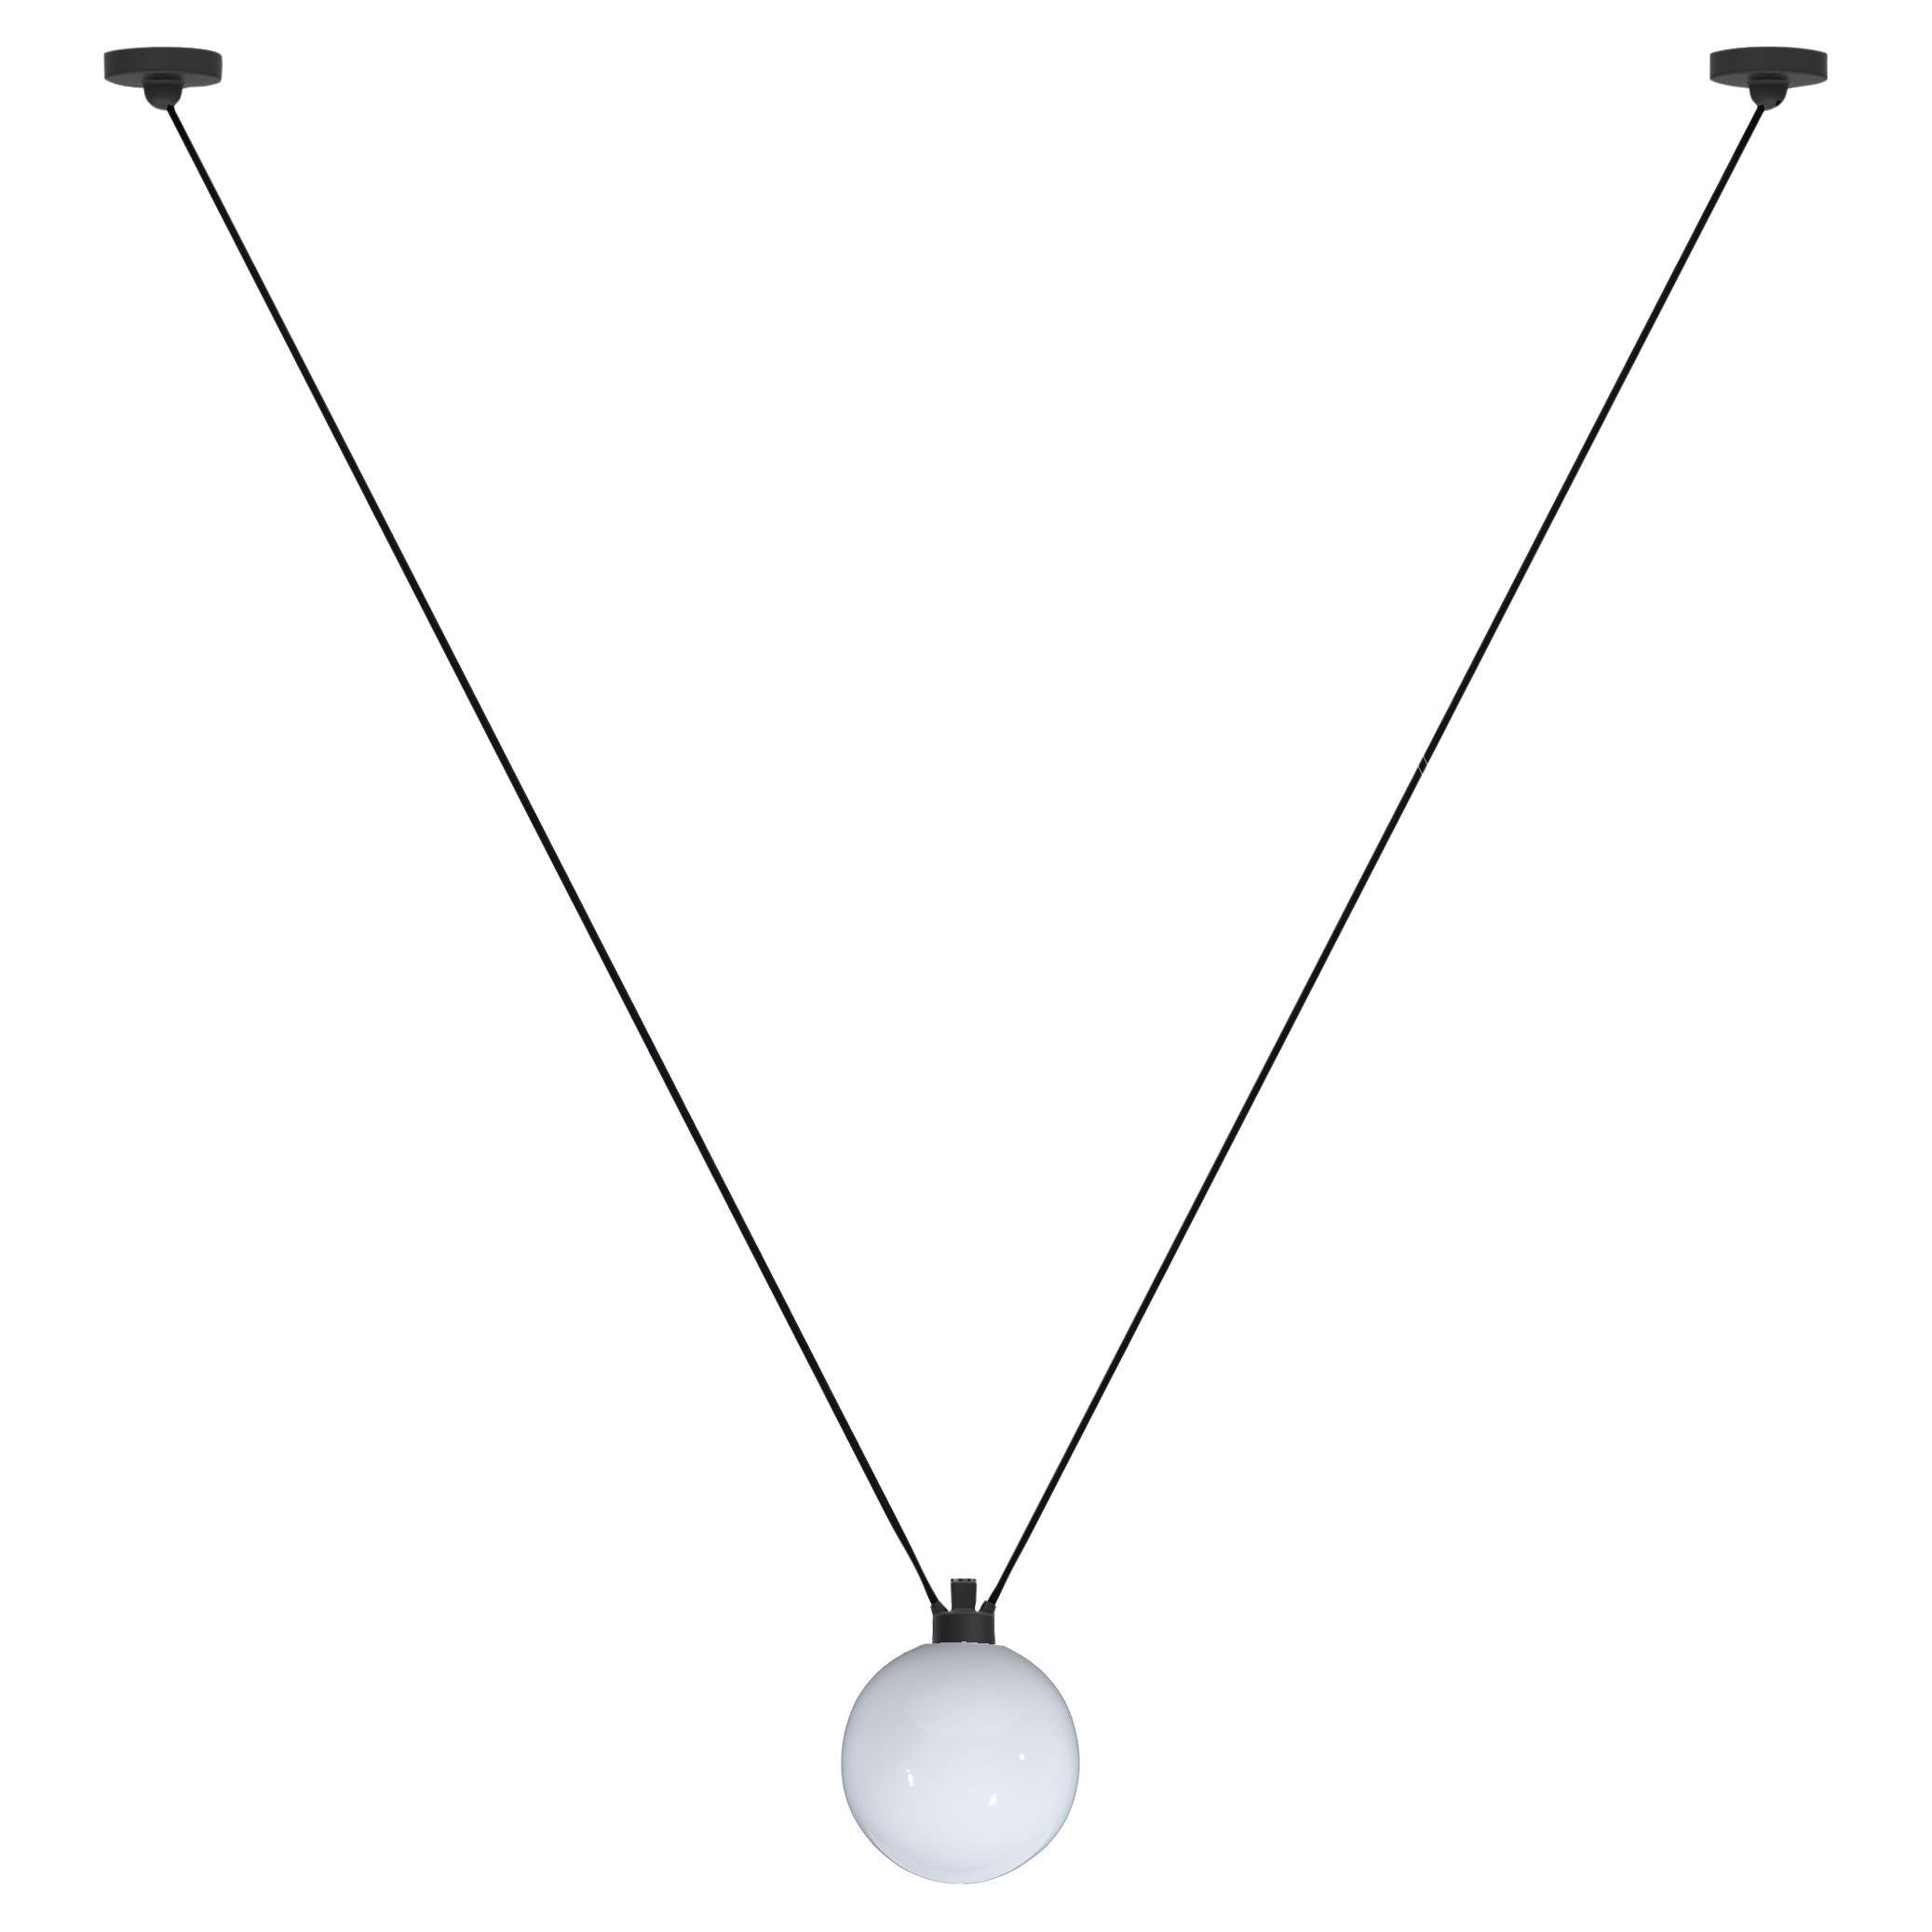 DCW Editions Les Acrobates N°323 Pendant Lamp in Black Arm and Small Glassball For Sale